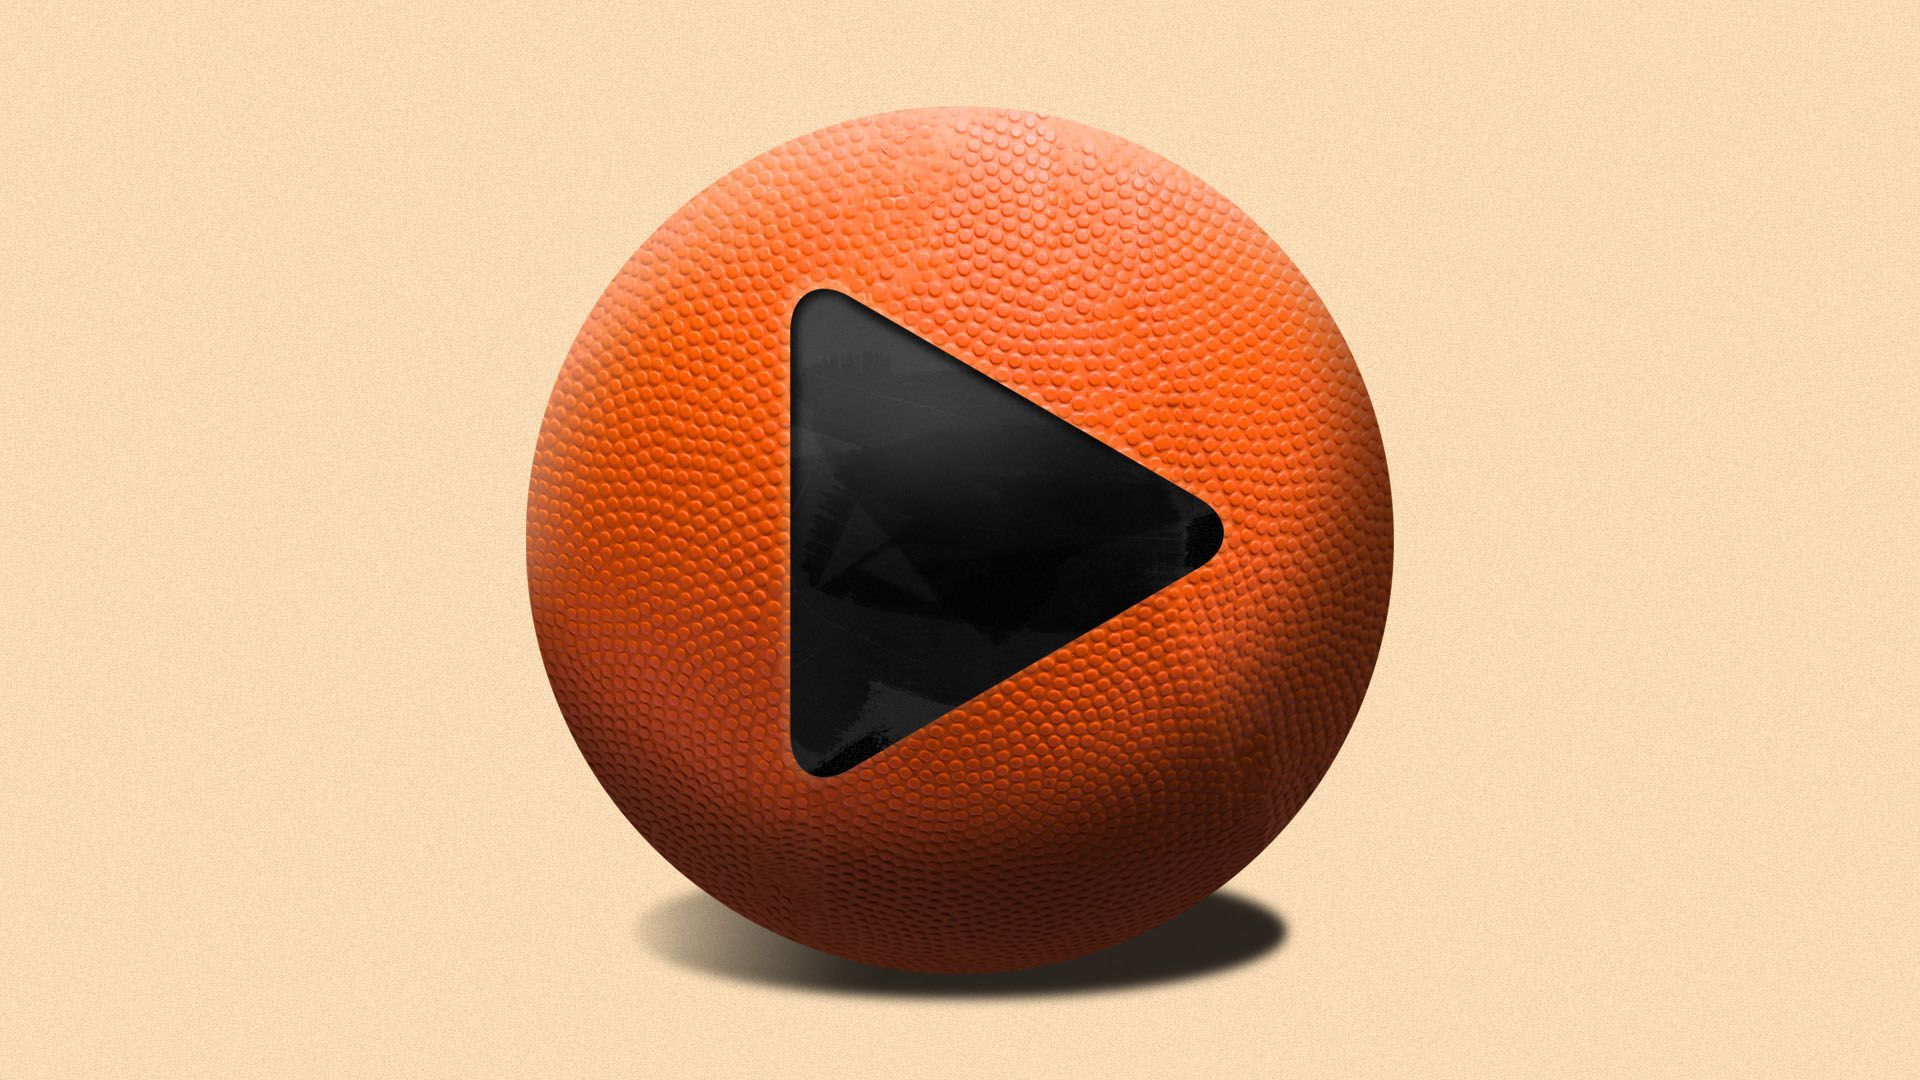 Illustration of a basketball with a play button on it